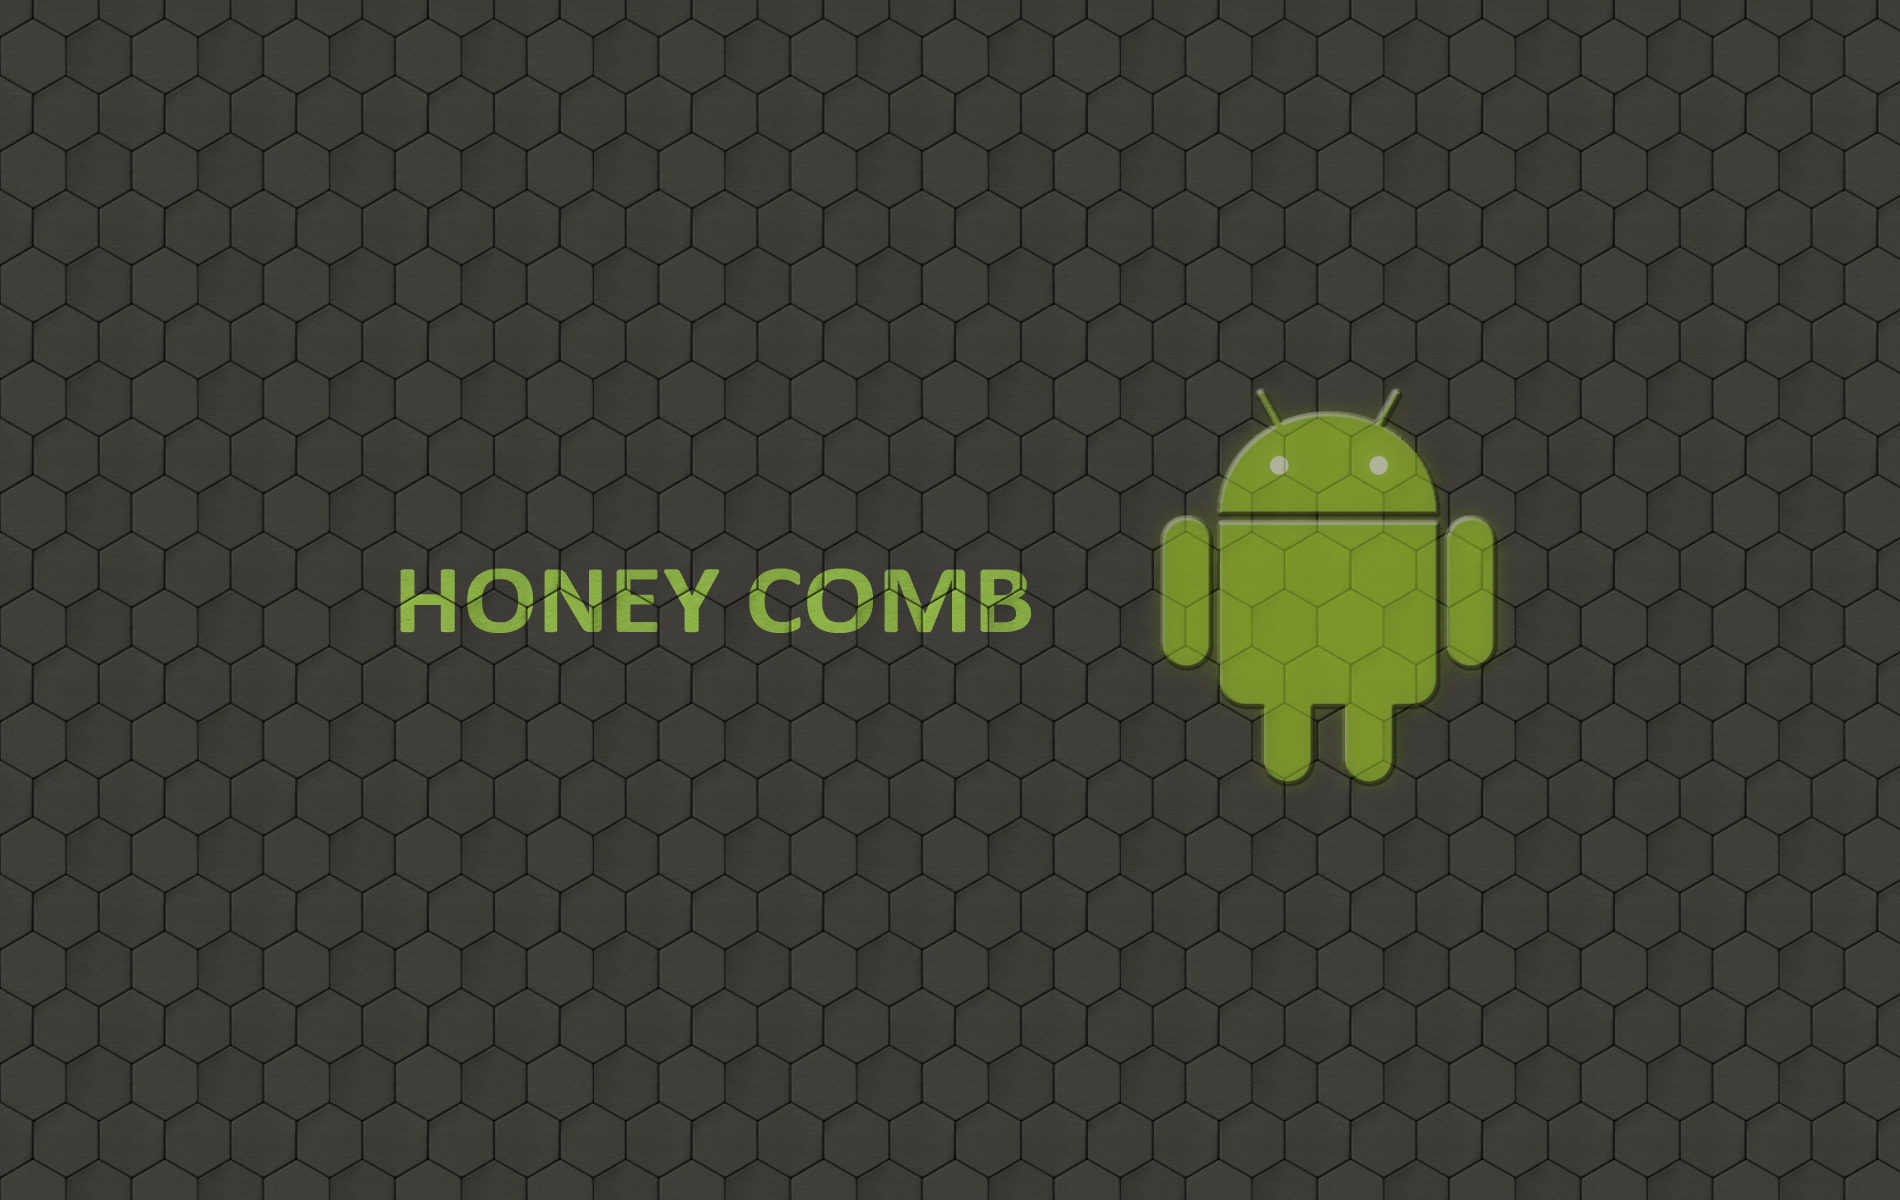 Android HoneyComb